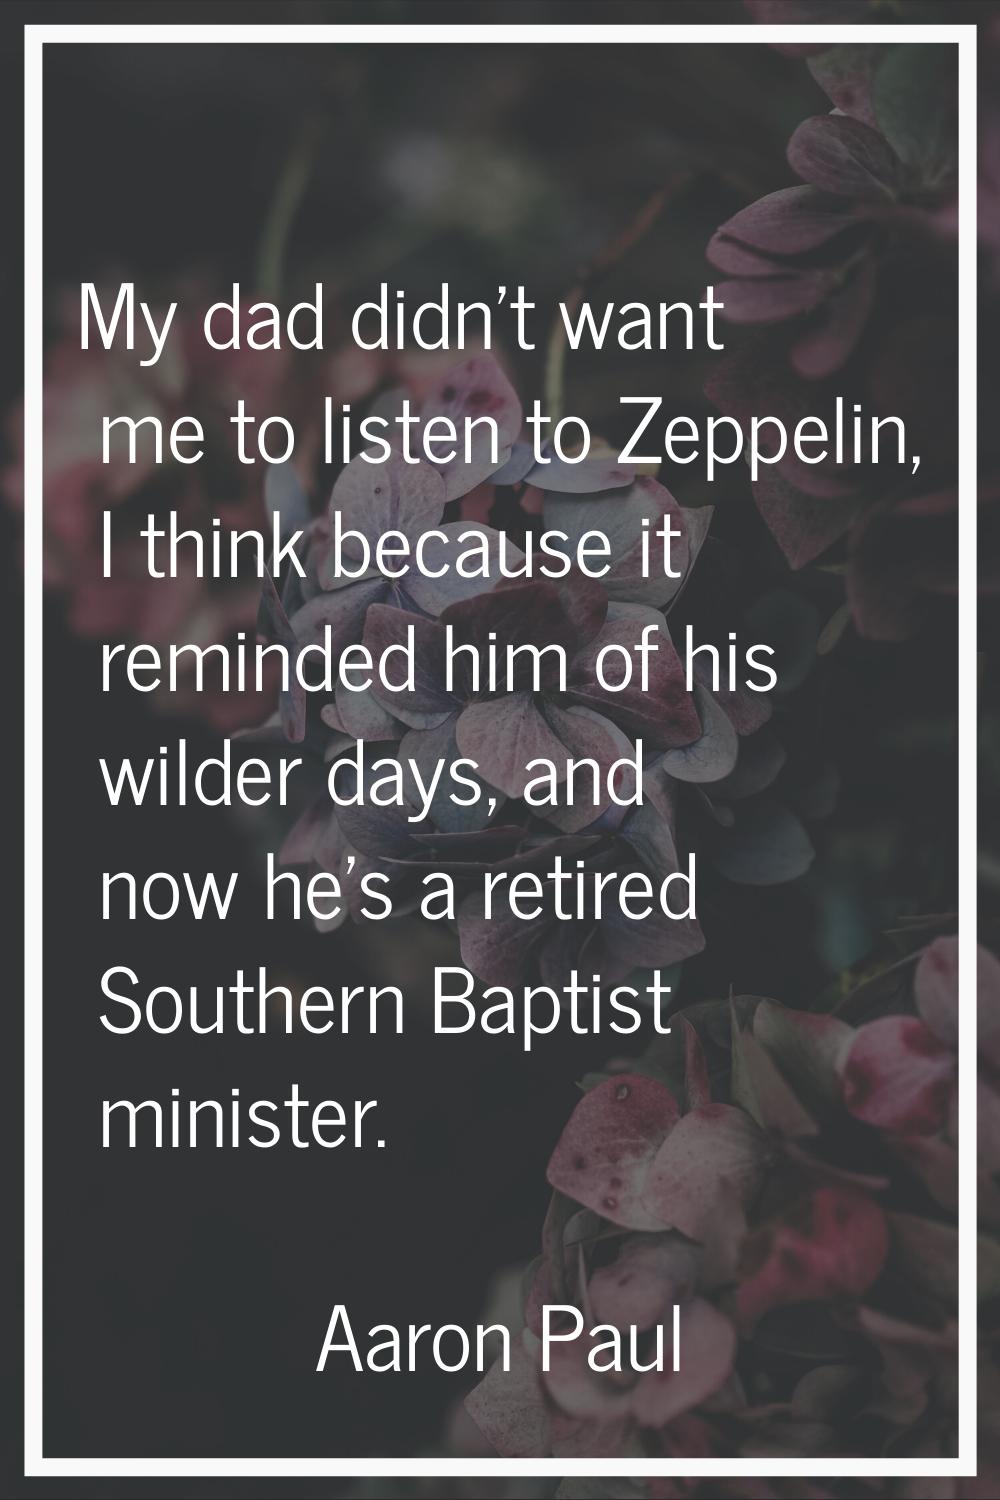 My dad didn't want me to listen to Zeppelin, I think because it reminded him of his wilder days, an